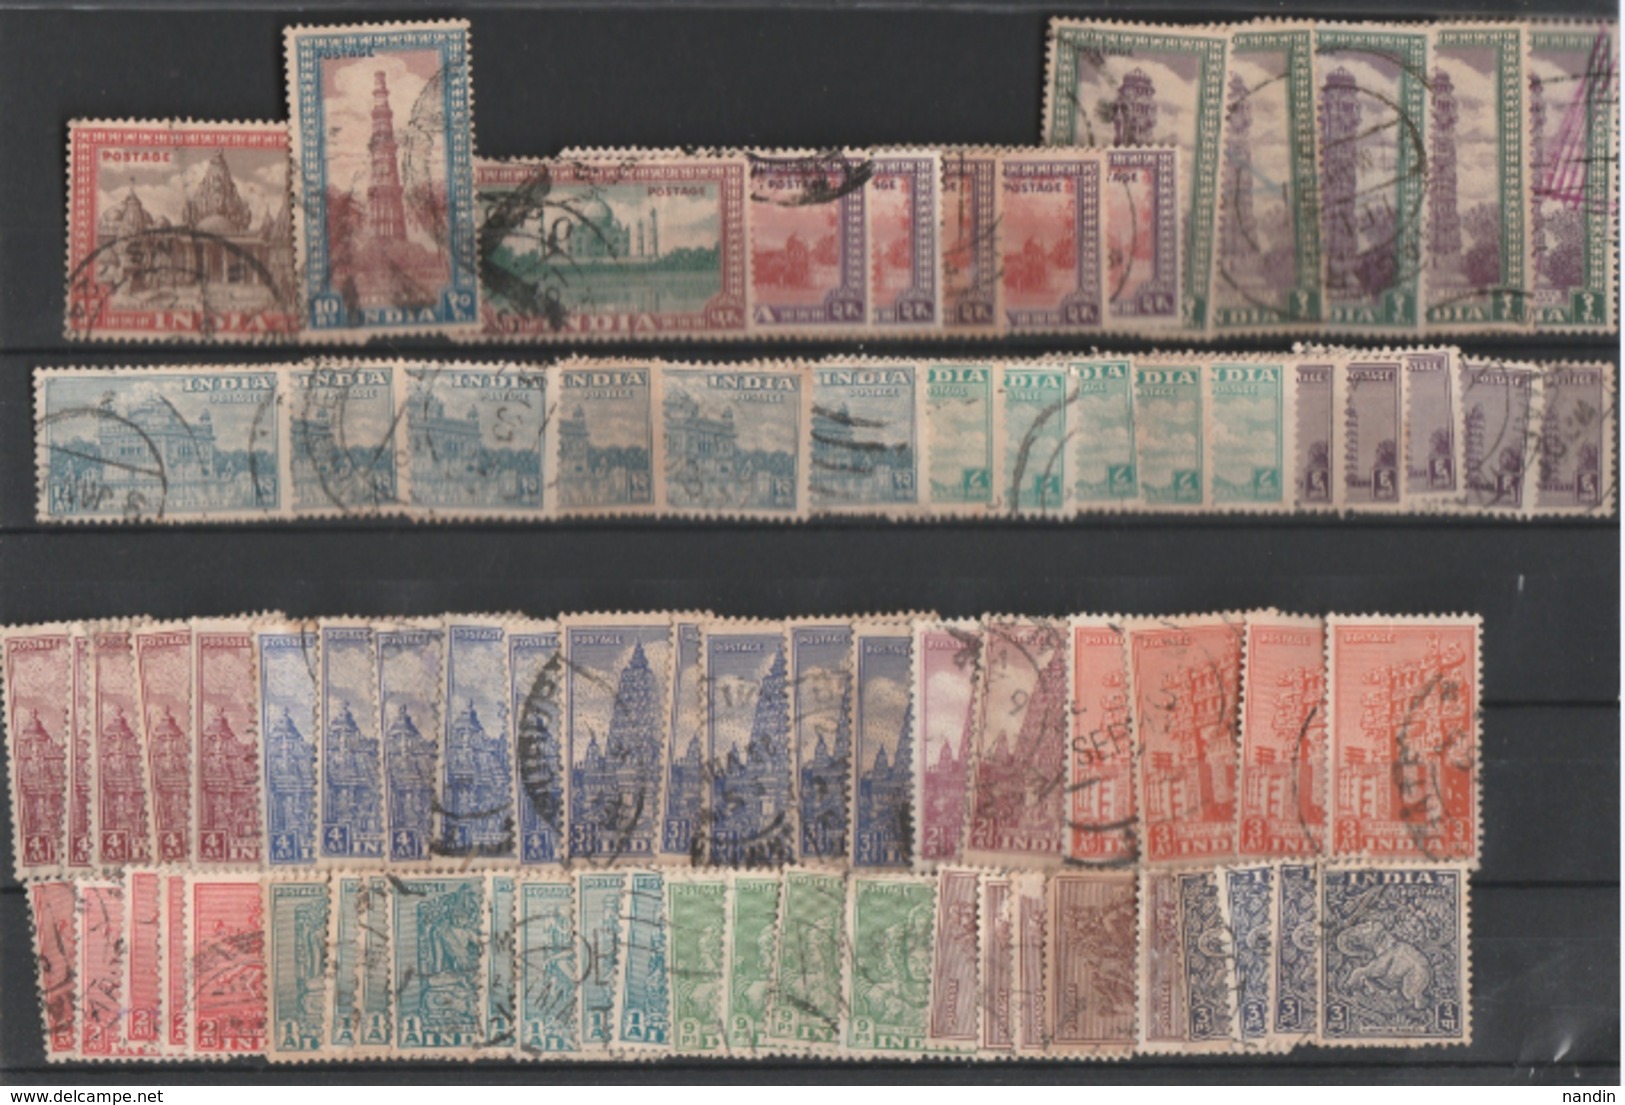 1949 USED STAMPS LOT  FROM INDIA ISSUED ON 2ND ANNV OF INDEPENDENCE ON ARCHAEOLOGICAL & HISTORICAL MONUMENTS - Used Stamps